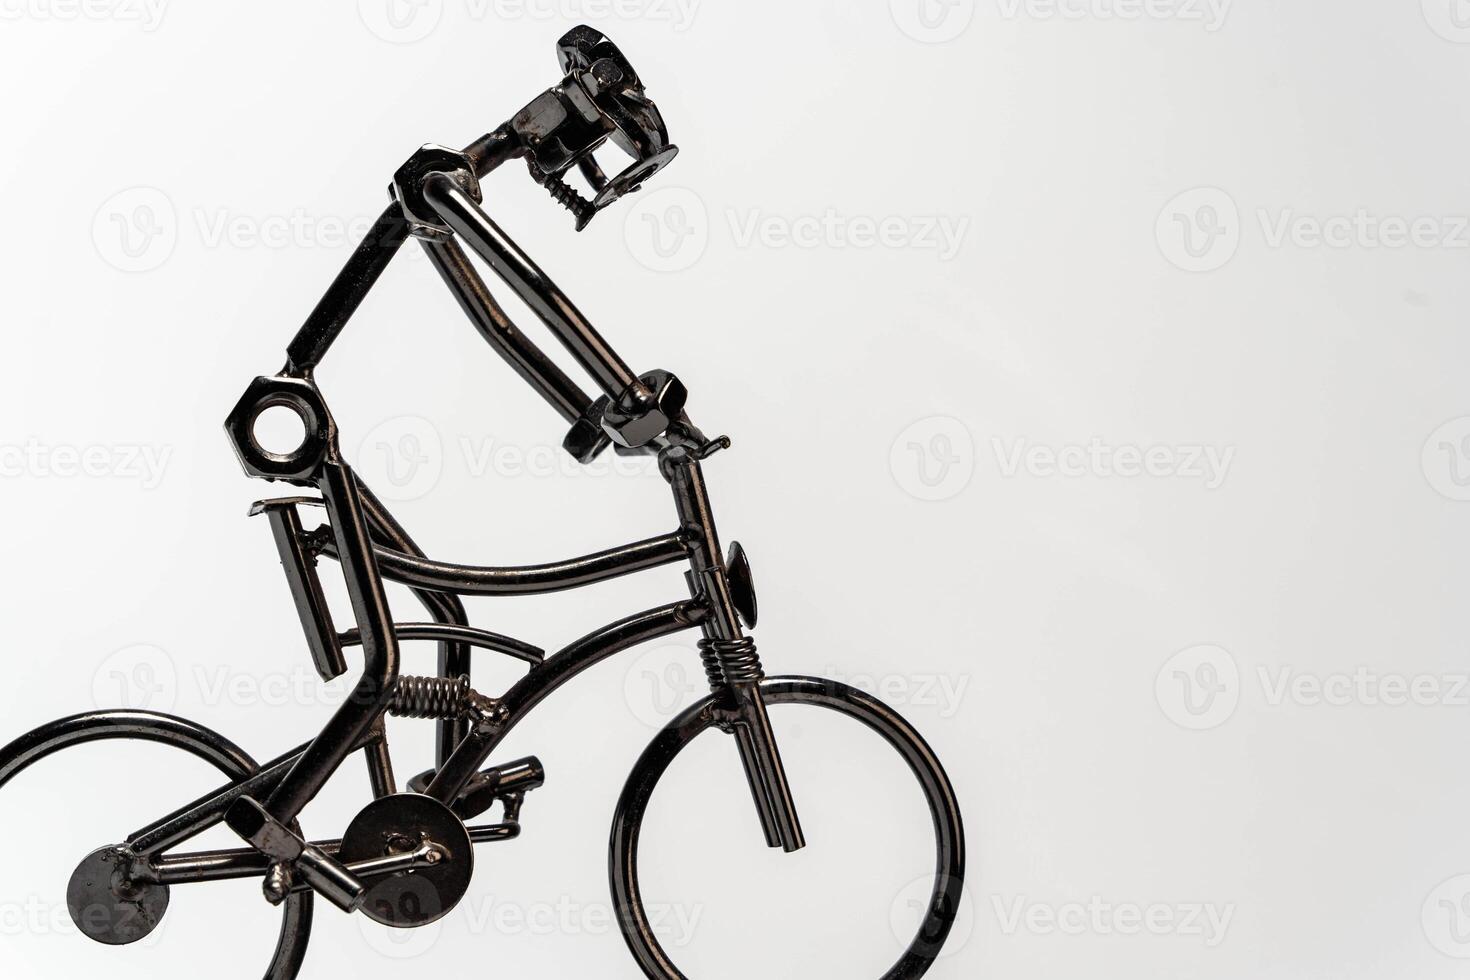 Metal parts cyclist sculpture on white background with copy space photo